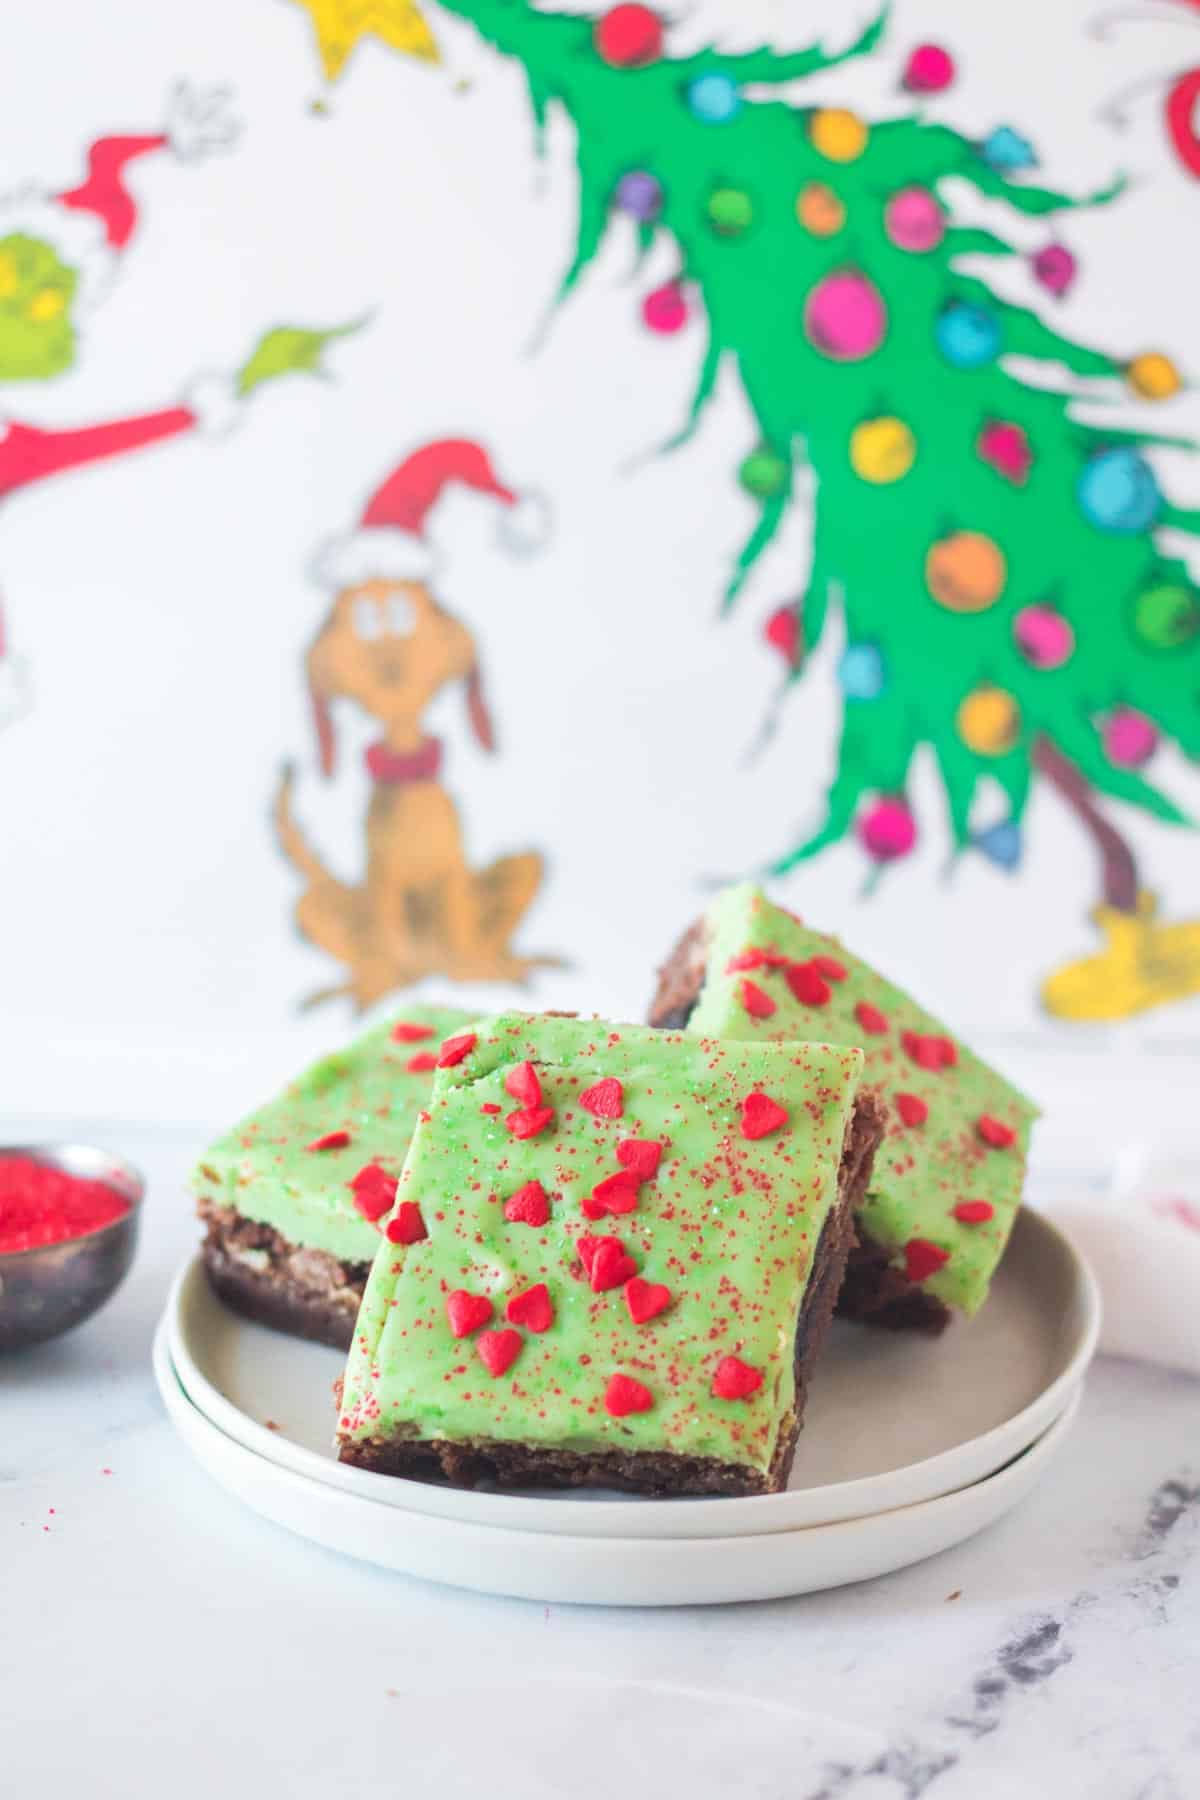 Grinch Brownies with green frosting and red heart sprinkles